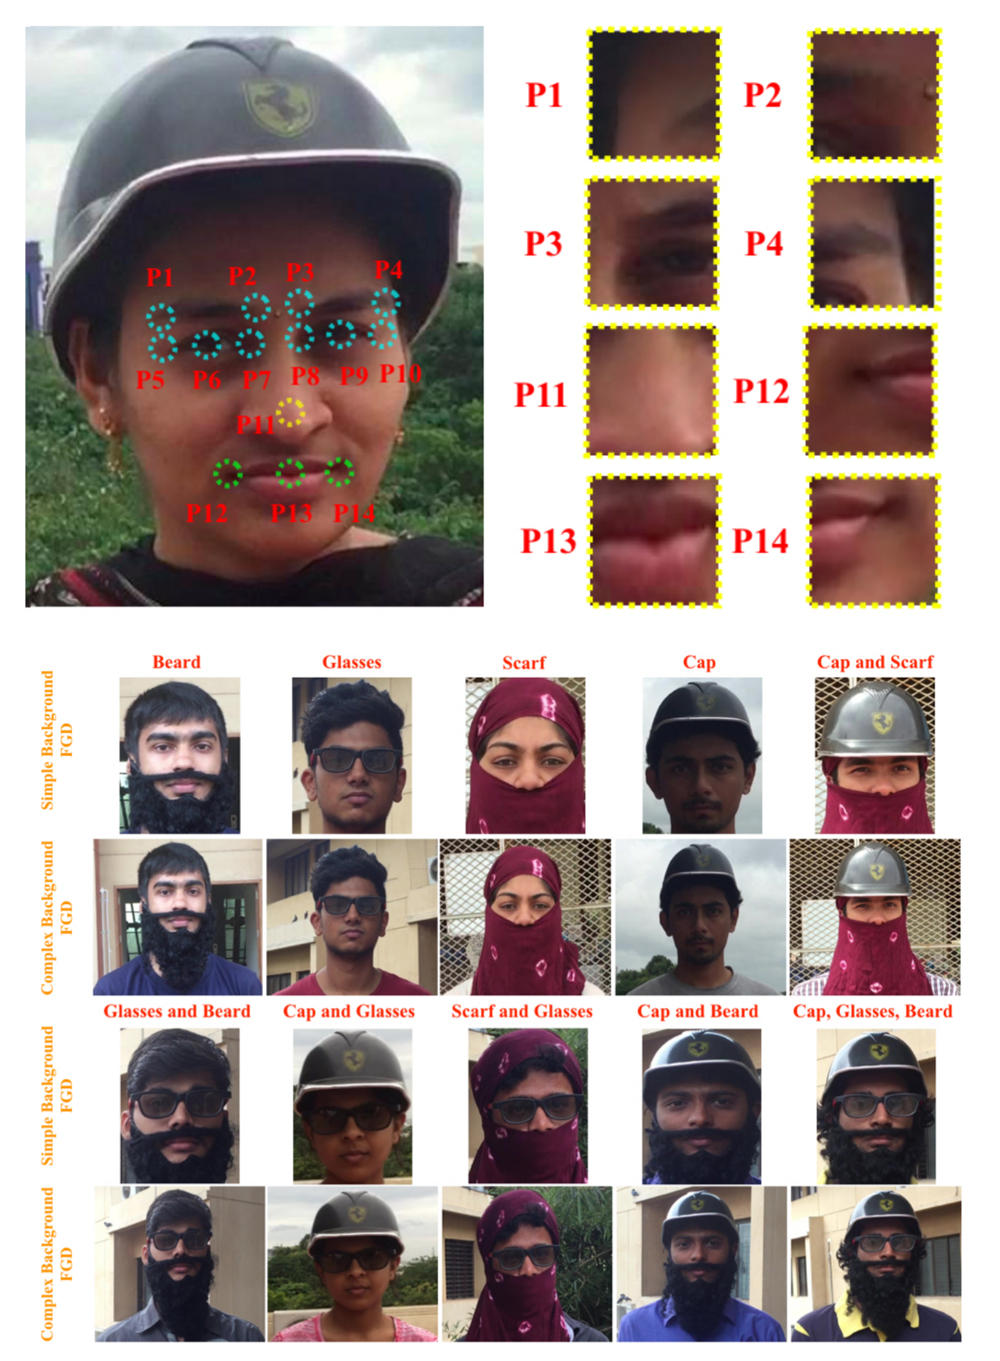 Disguised Face Identification